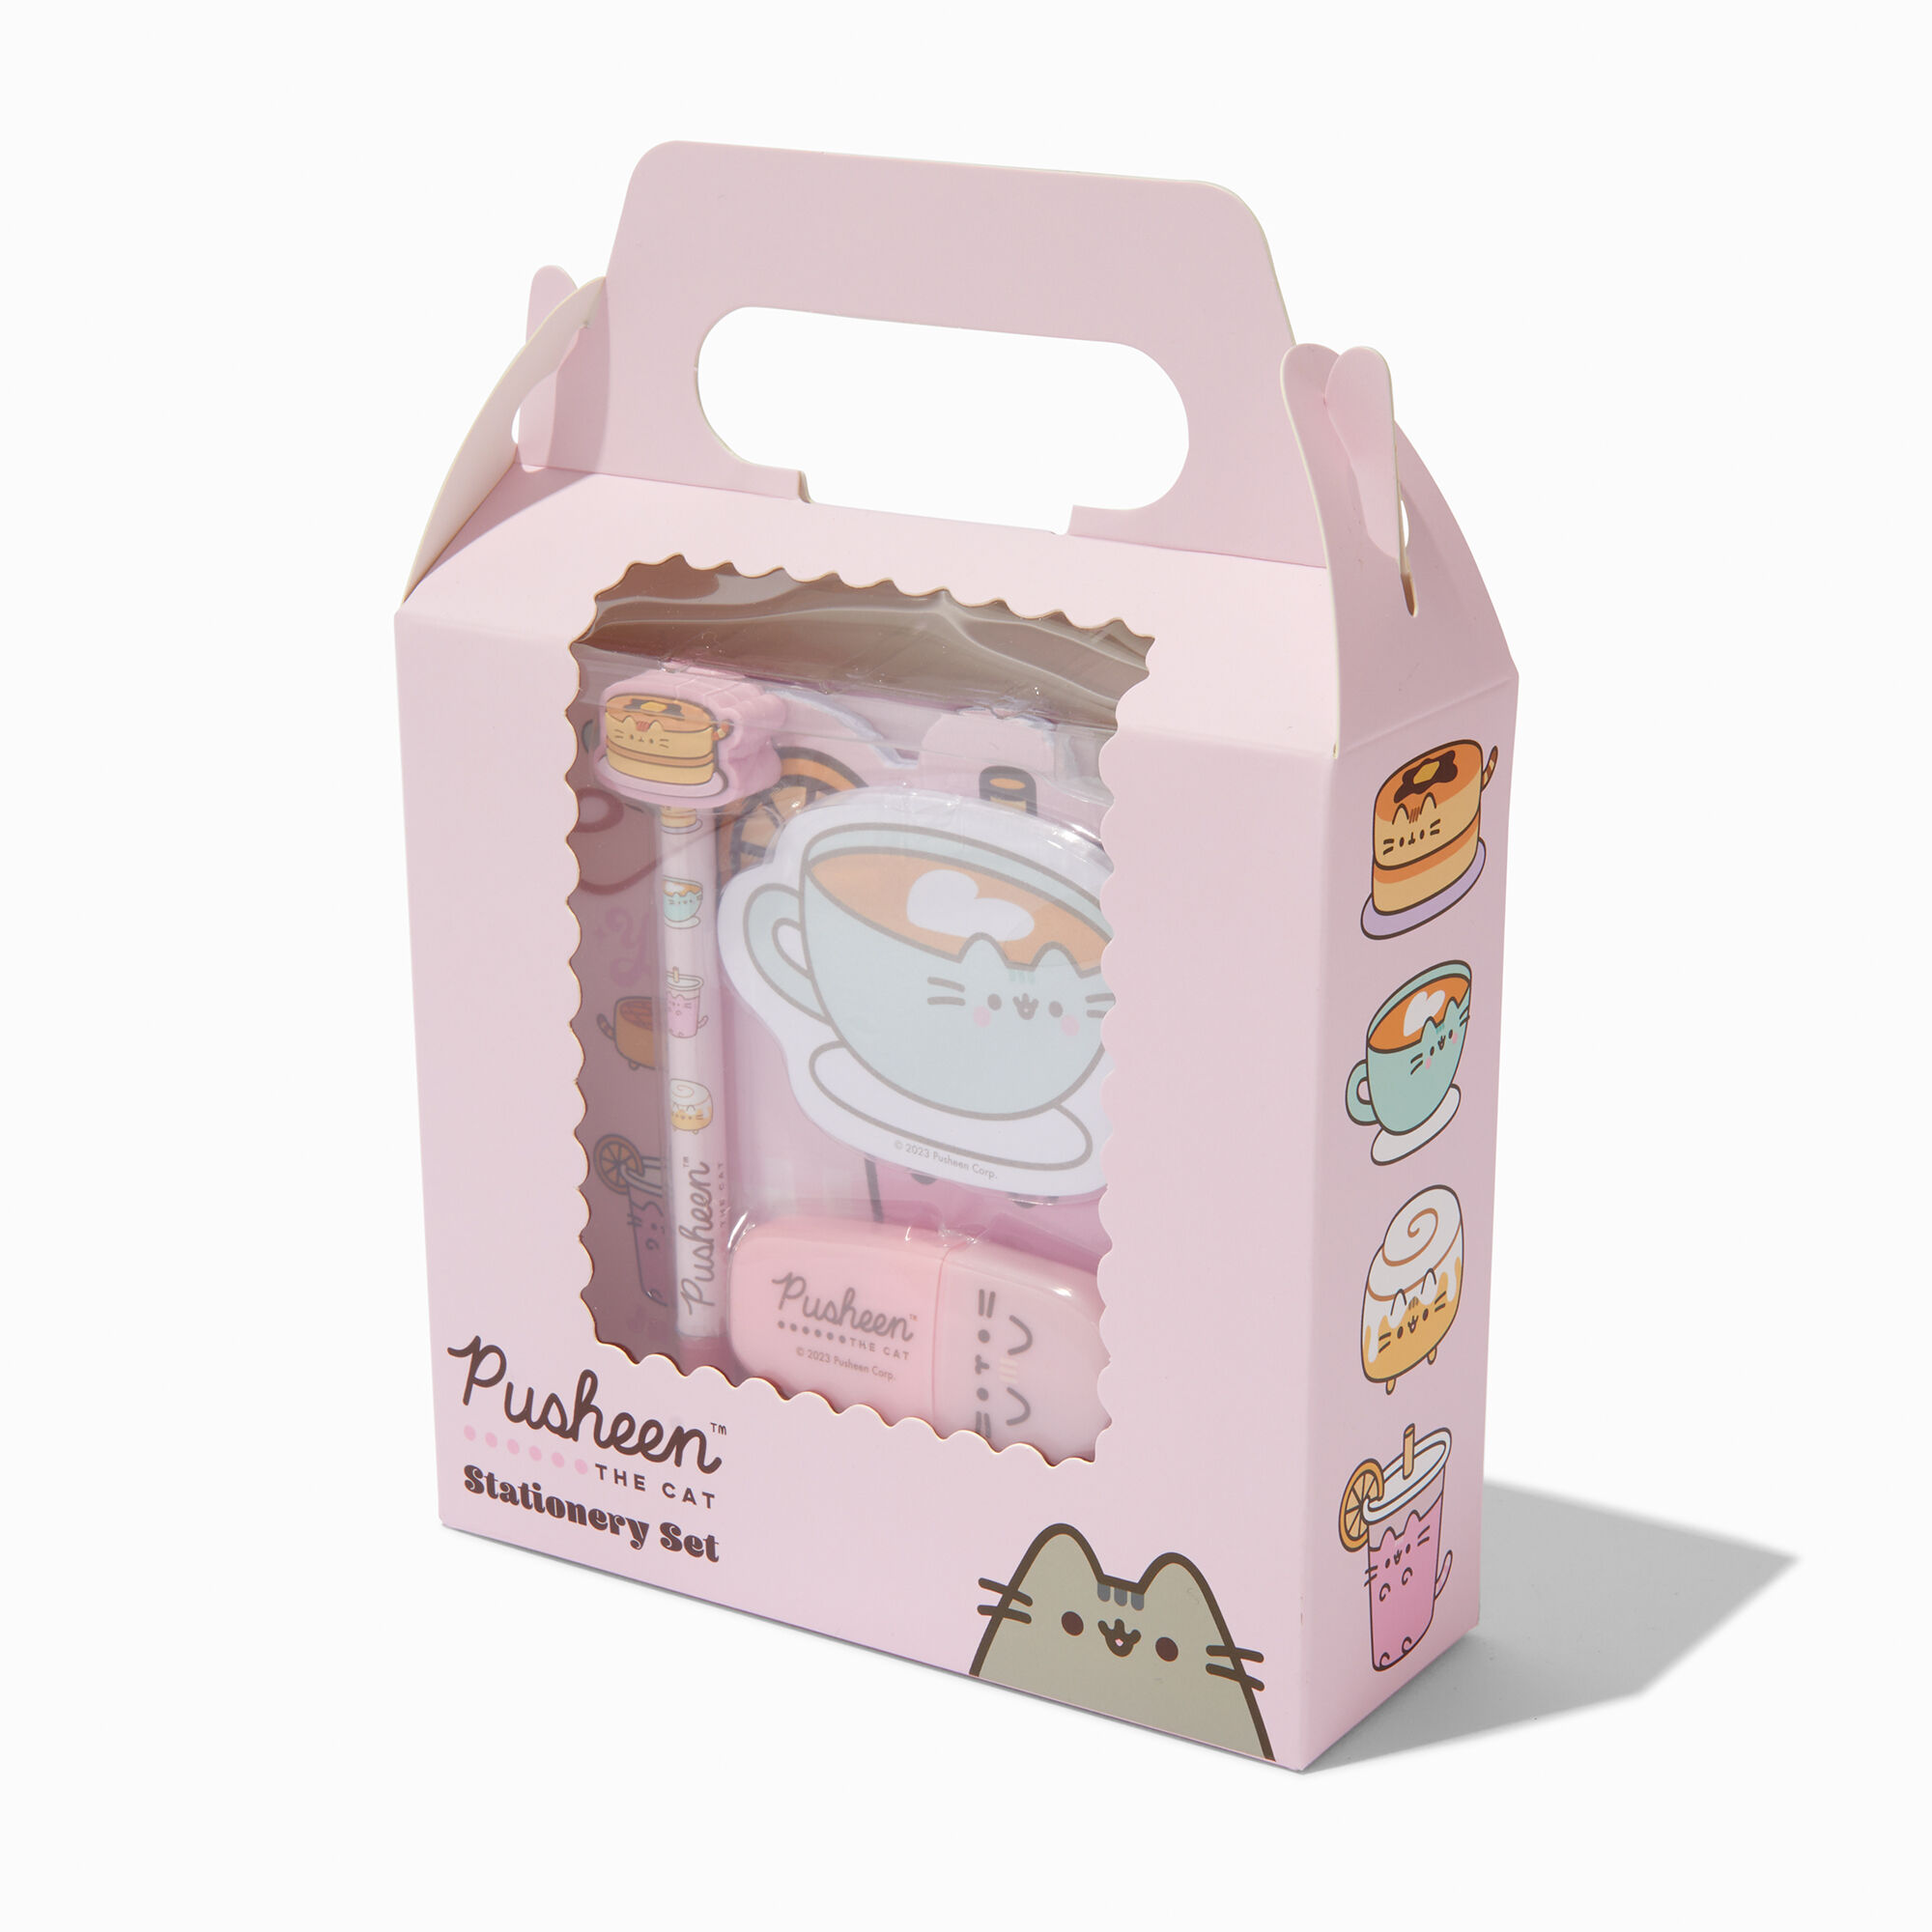 View Claires Pusheen Breakfast Stationery Set information